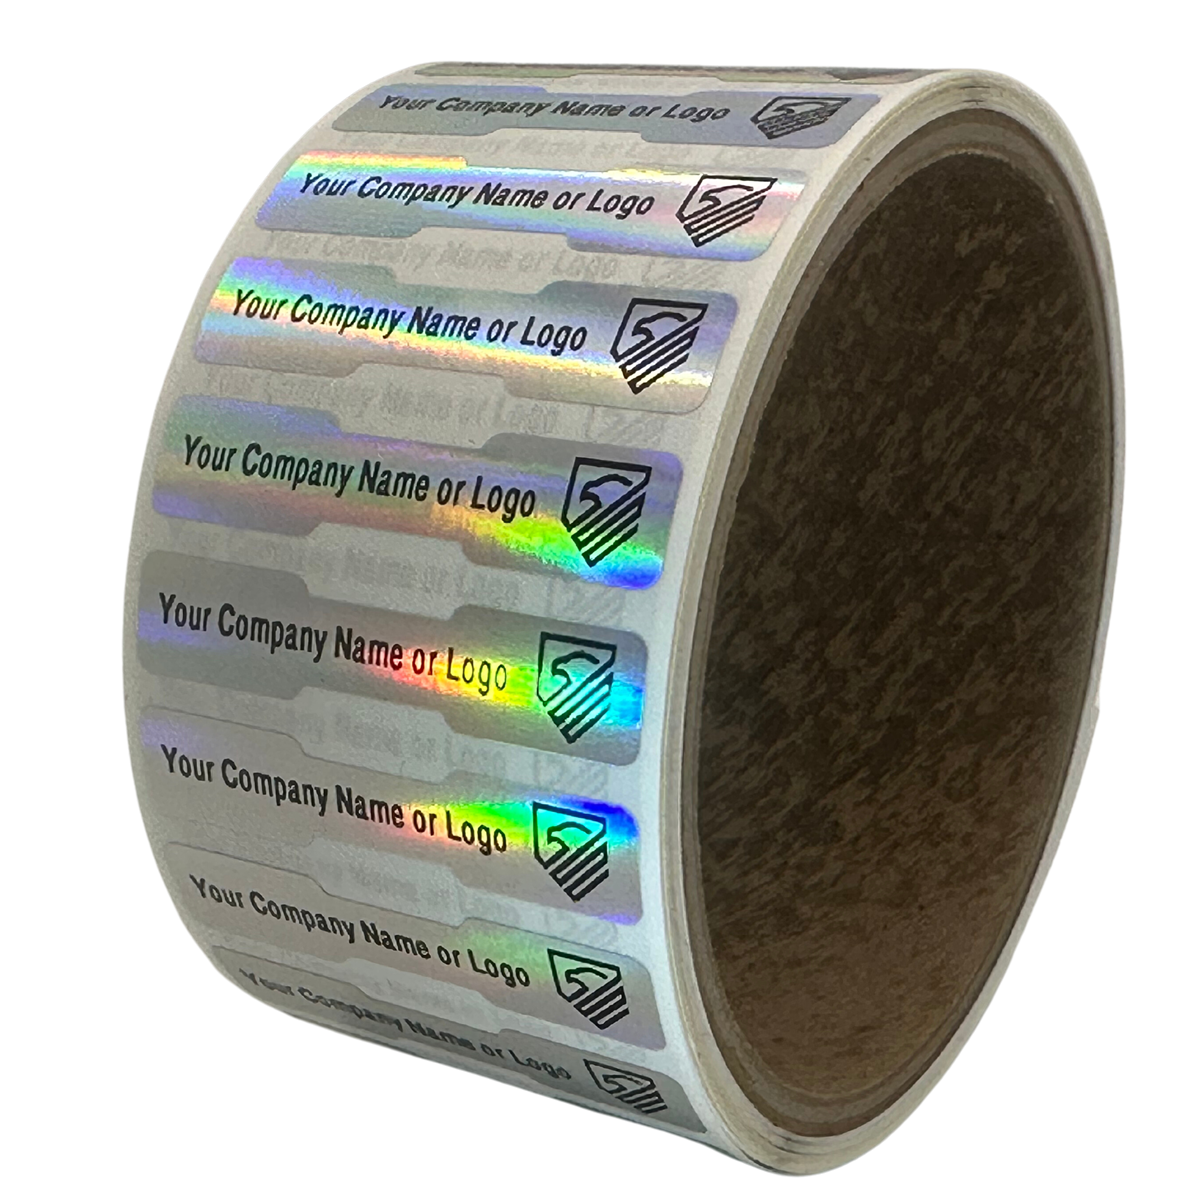 10,000 TamperColor Holographic Rainbow Color/ Finish Custom Printed Security Labels: Tamper Evident, Dogbone Shape Size 1.75" x 0.375 (44mm x 9mm) >Click on item details to customize.